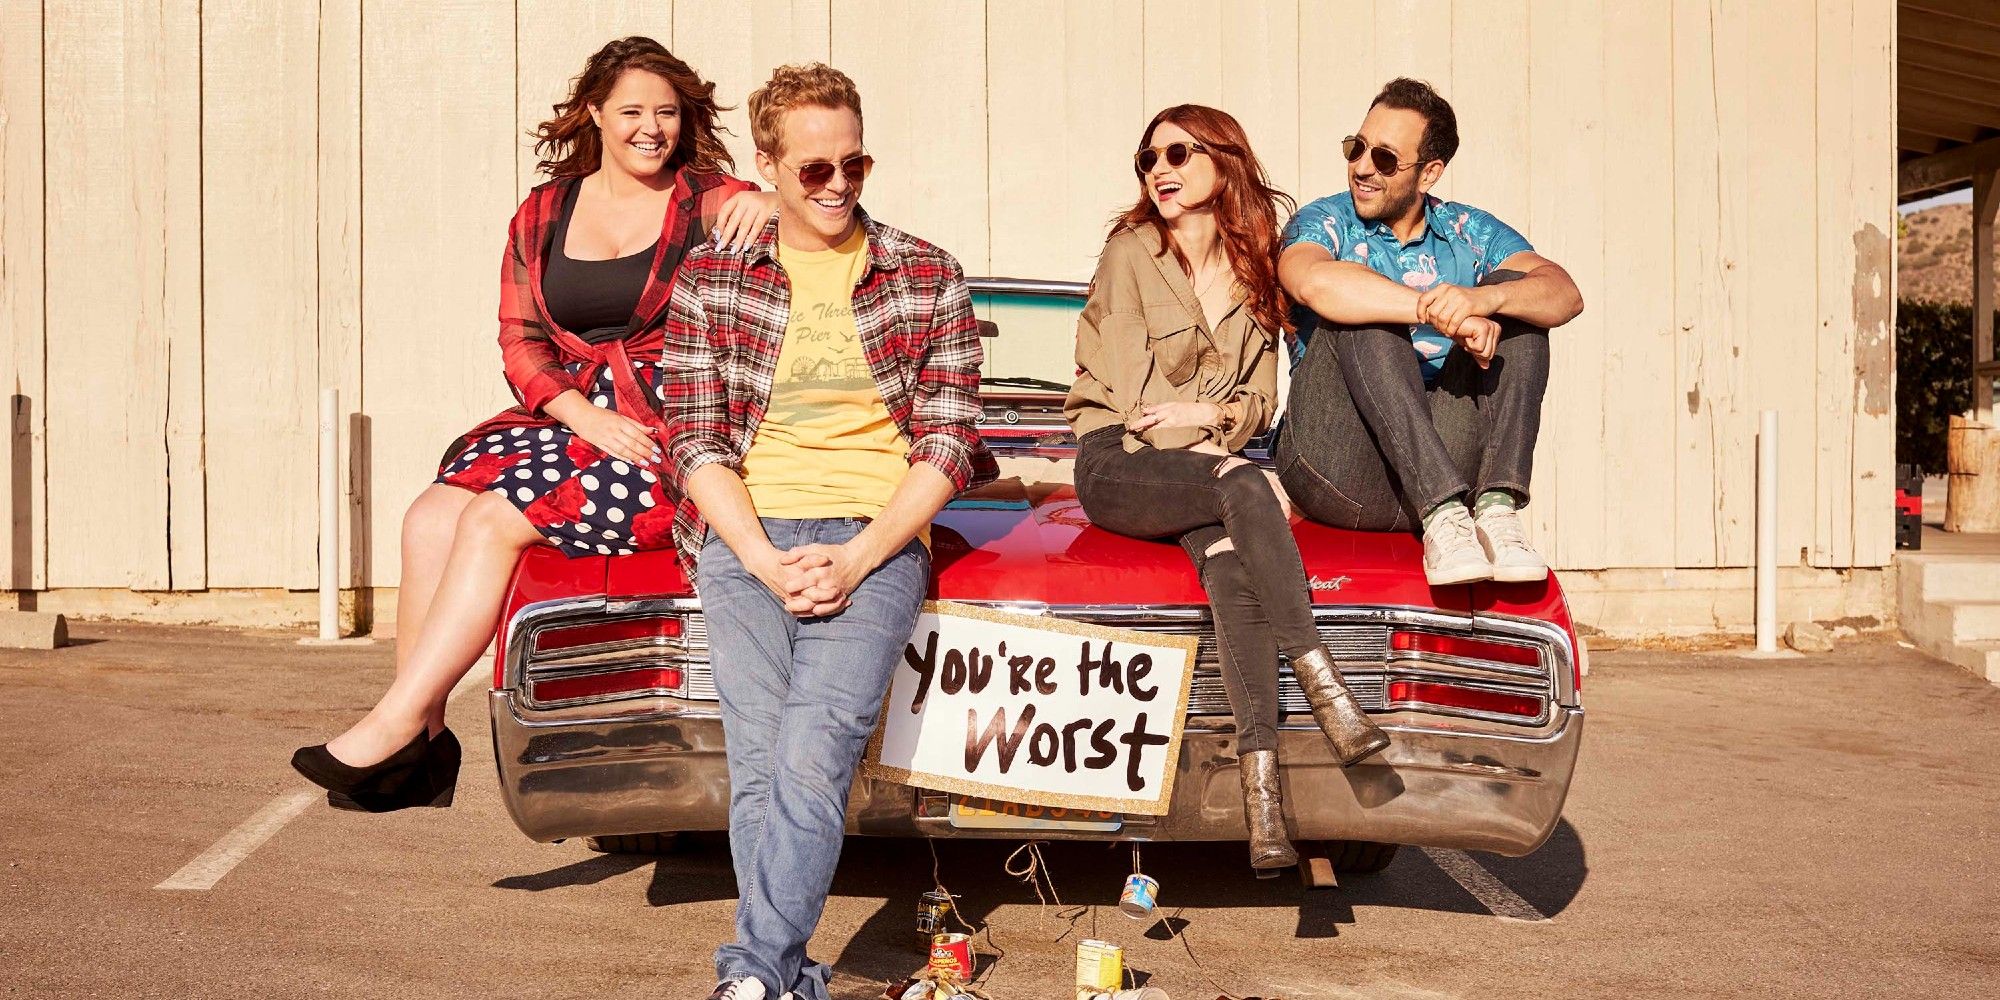 Kether Donahue, Chris Geere, Aya Cash and Desmin Borges in You're The Worst